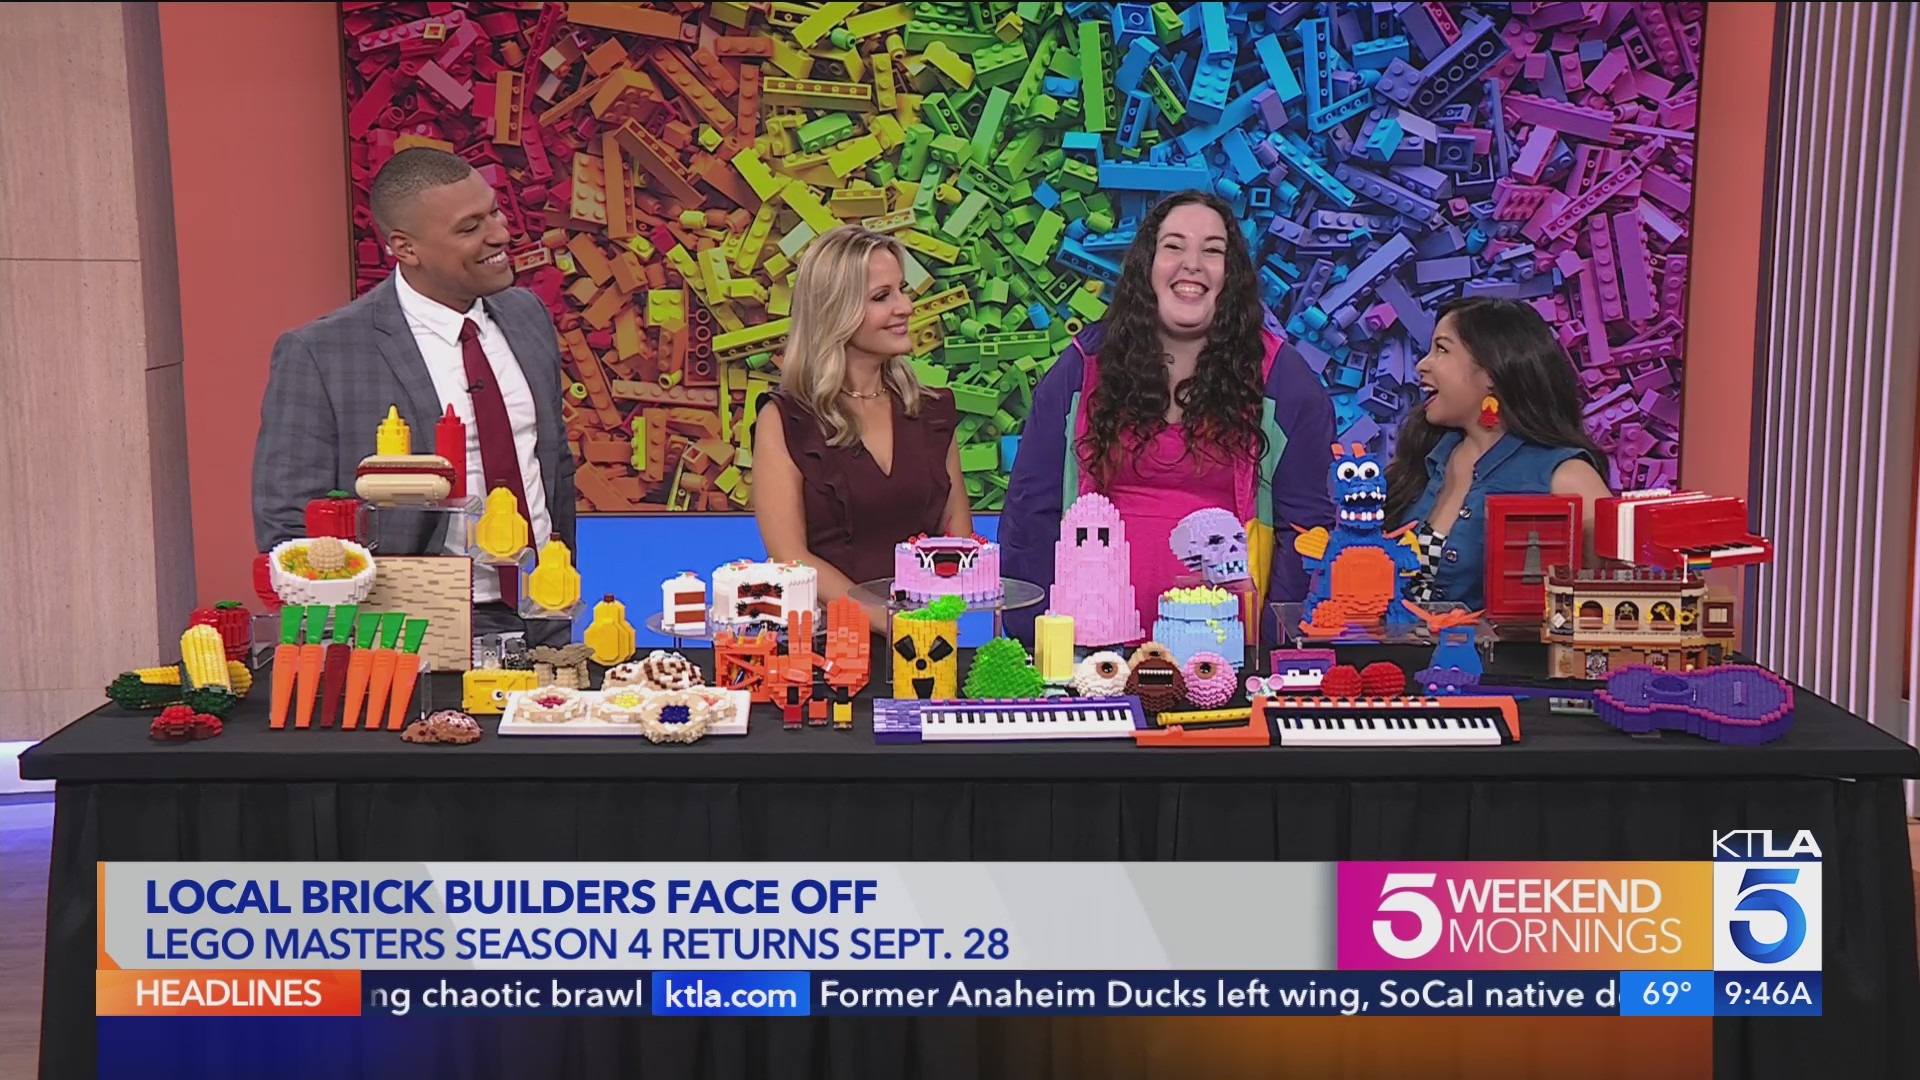 Local Lego Masters contestants Alysson Gail and Melanie Hernandez preview their process